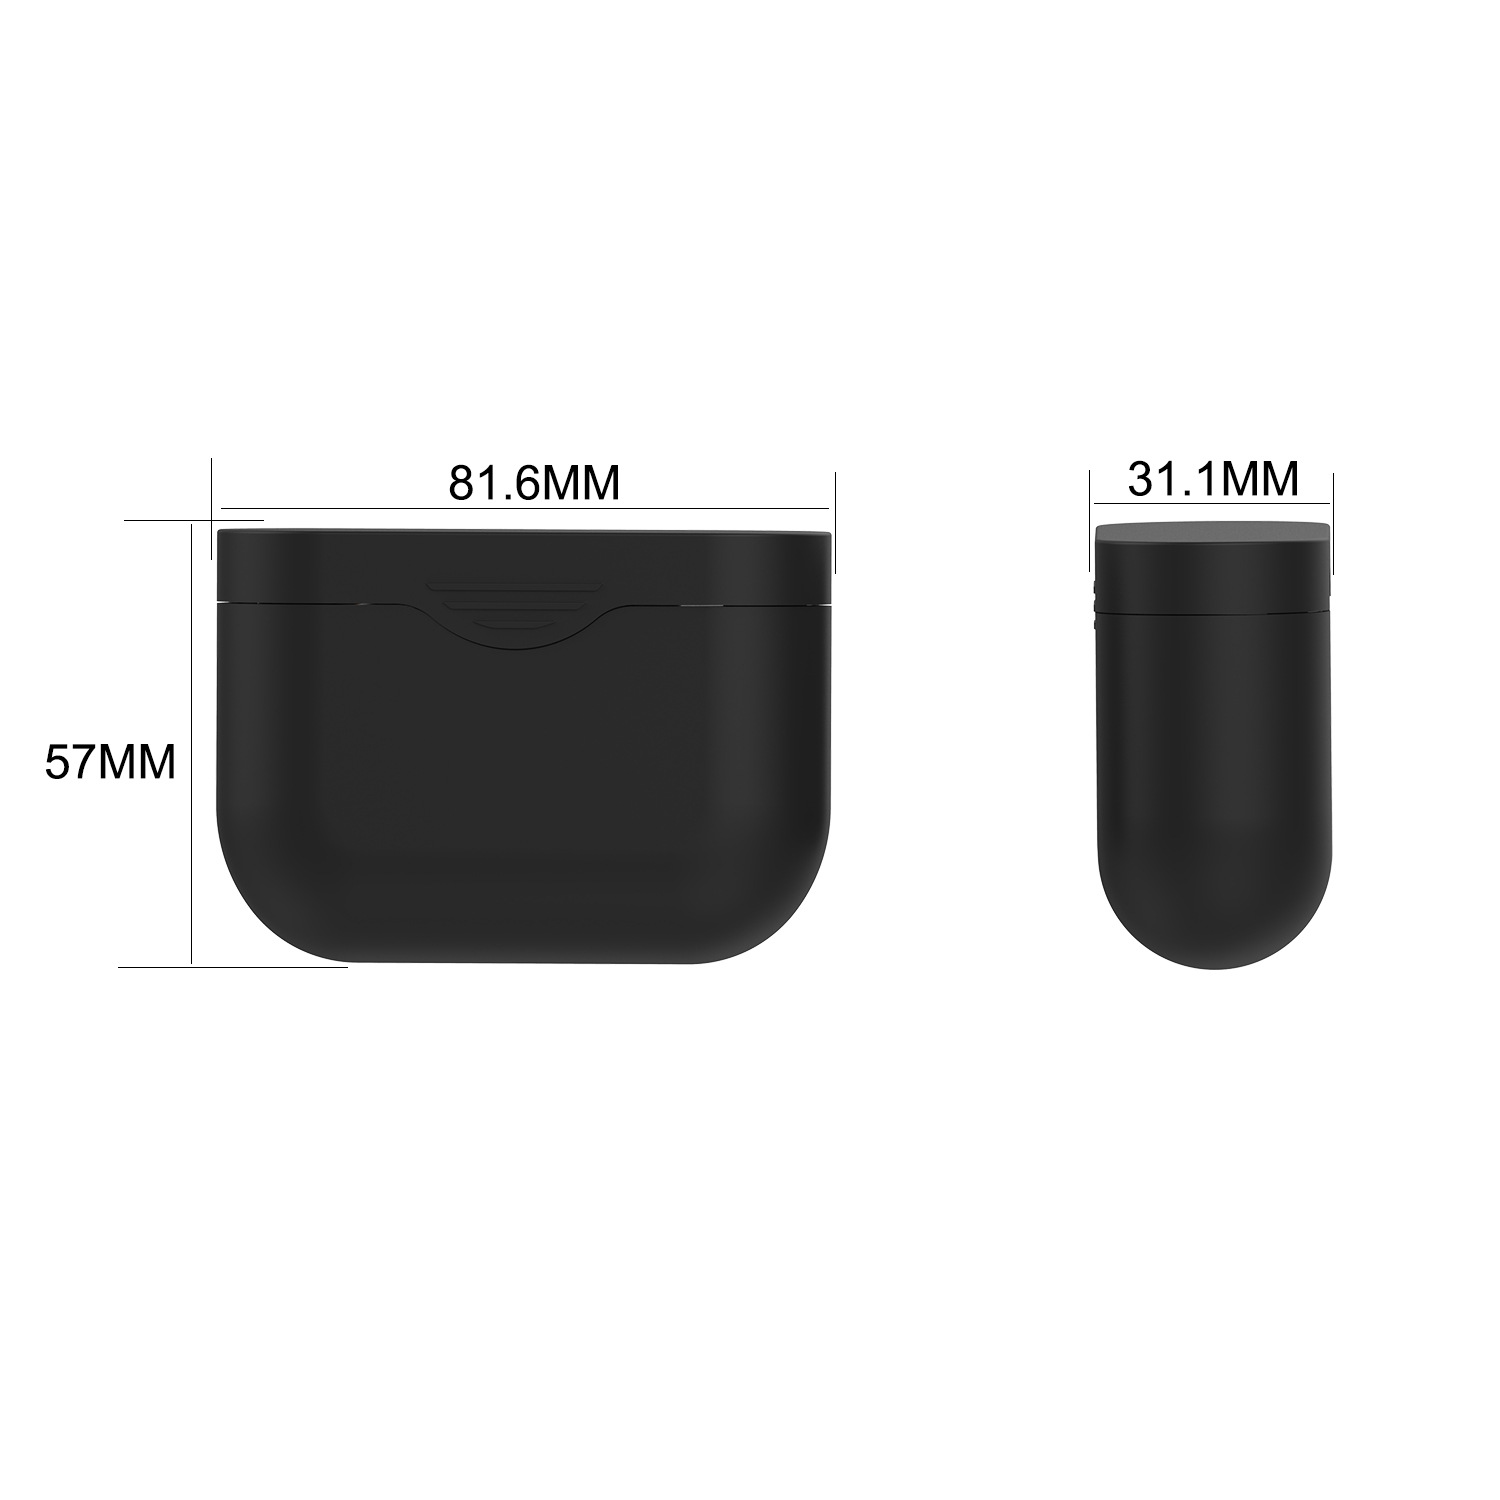 Silicone-Storage-Bag-Protective-Waterproof-Cover-Case-for-Sony-WF-1000XM3-Earphone-1591063-1